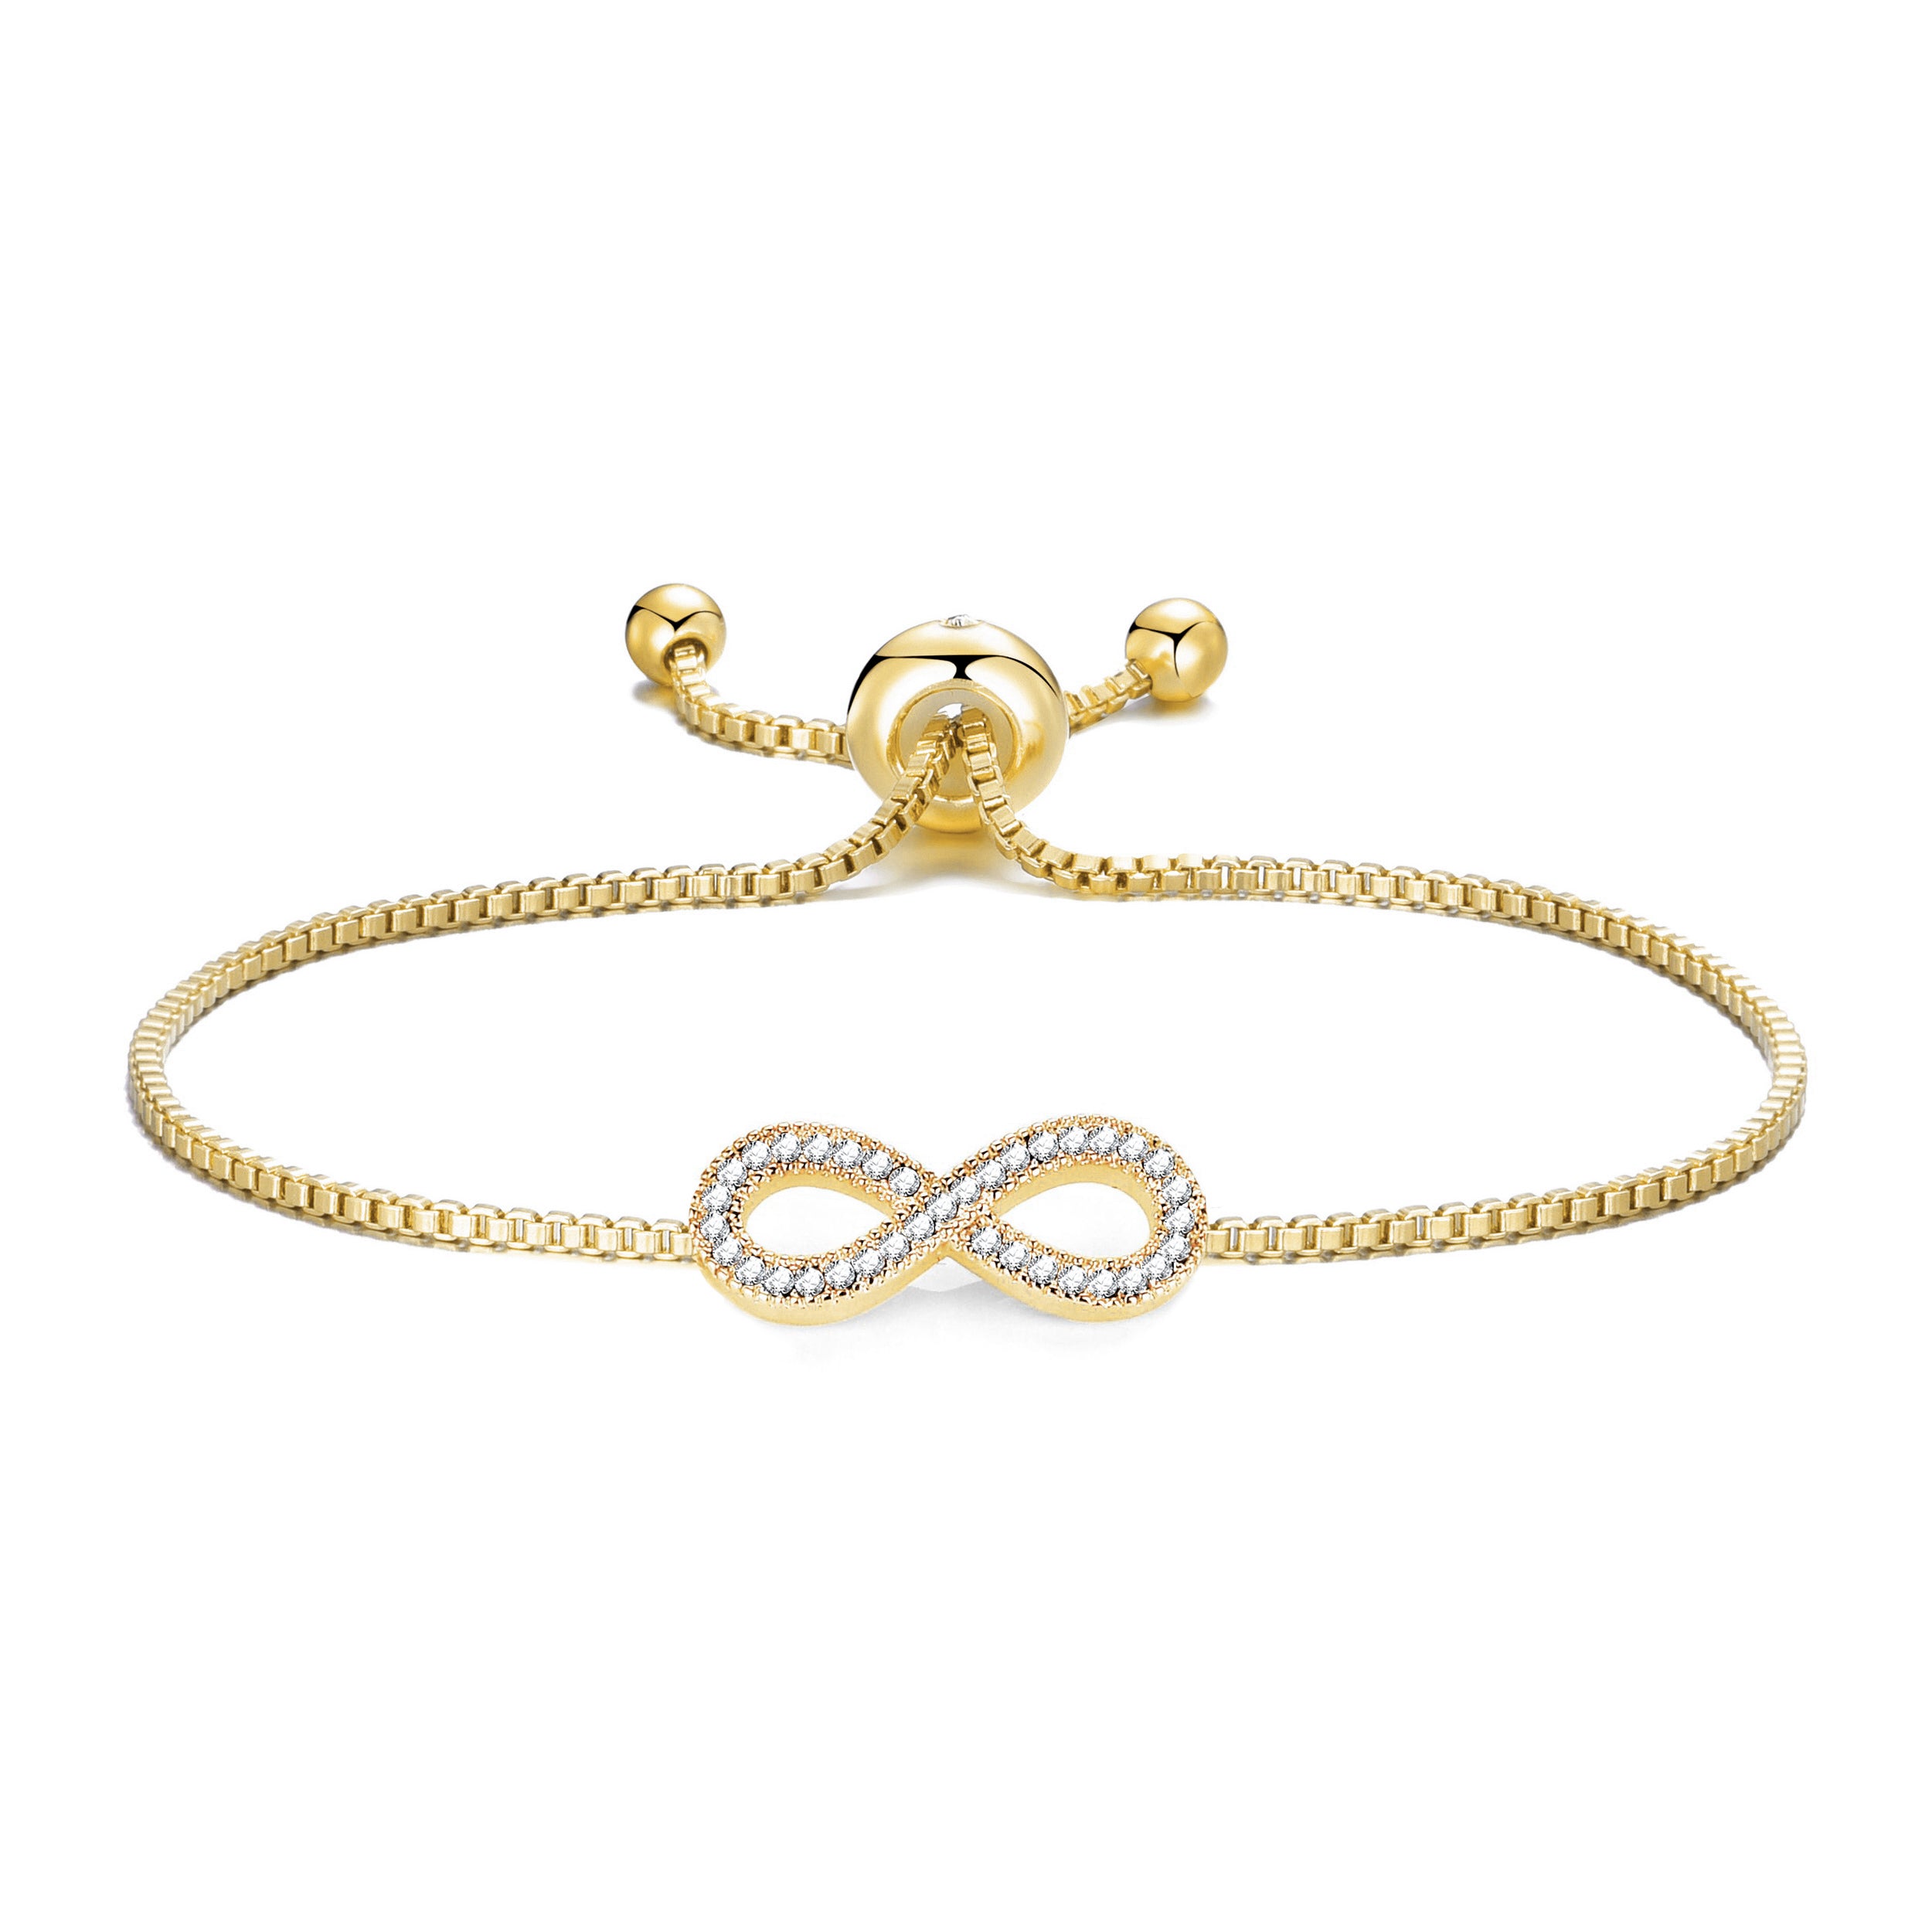 Gold Plated Infinity Friendship Bracelet Created with Zircondia® Crystals by Philip Jones Jewellery